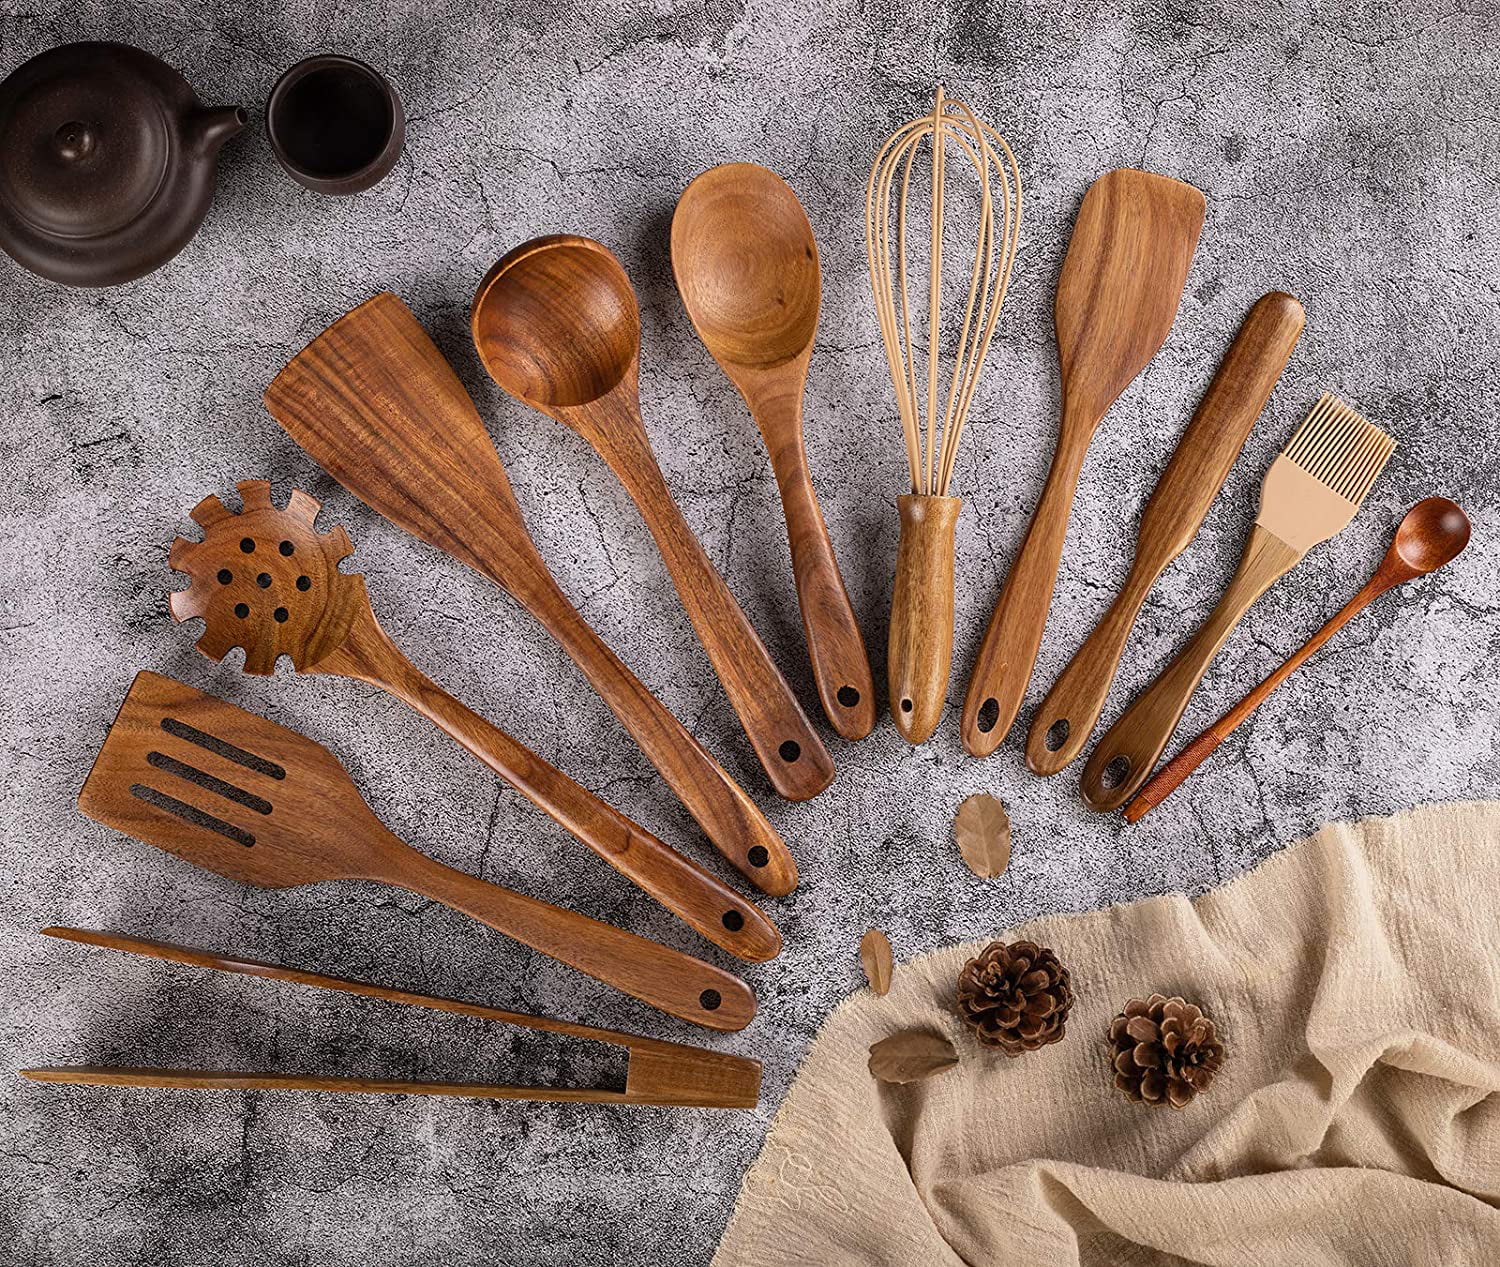  Wooden Spoons for Cooking, 10 Pcs Teak Wood Cooking Utensil Set  – Wooden Kitchen Utensils for Nonstick Pans & Cookware – Sturdy,  Lightweight & Heat Resistant: Home & Kitchen